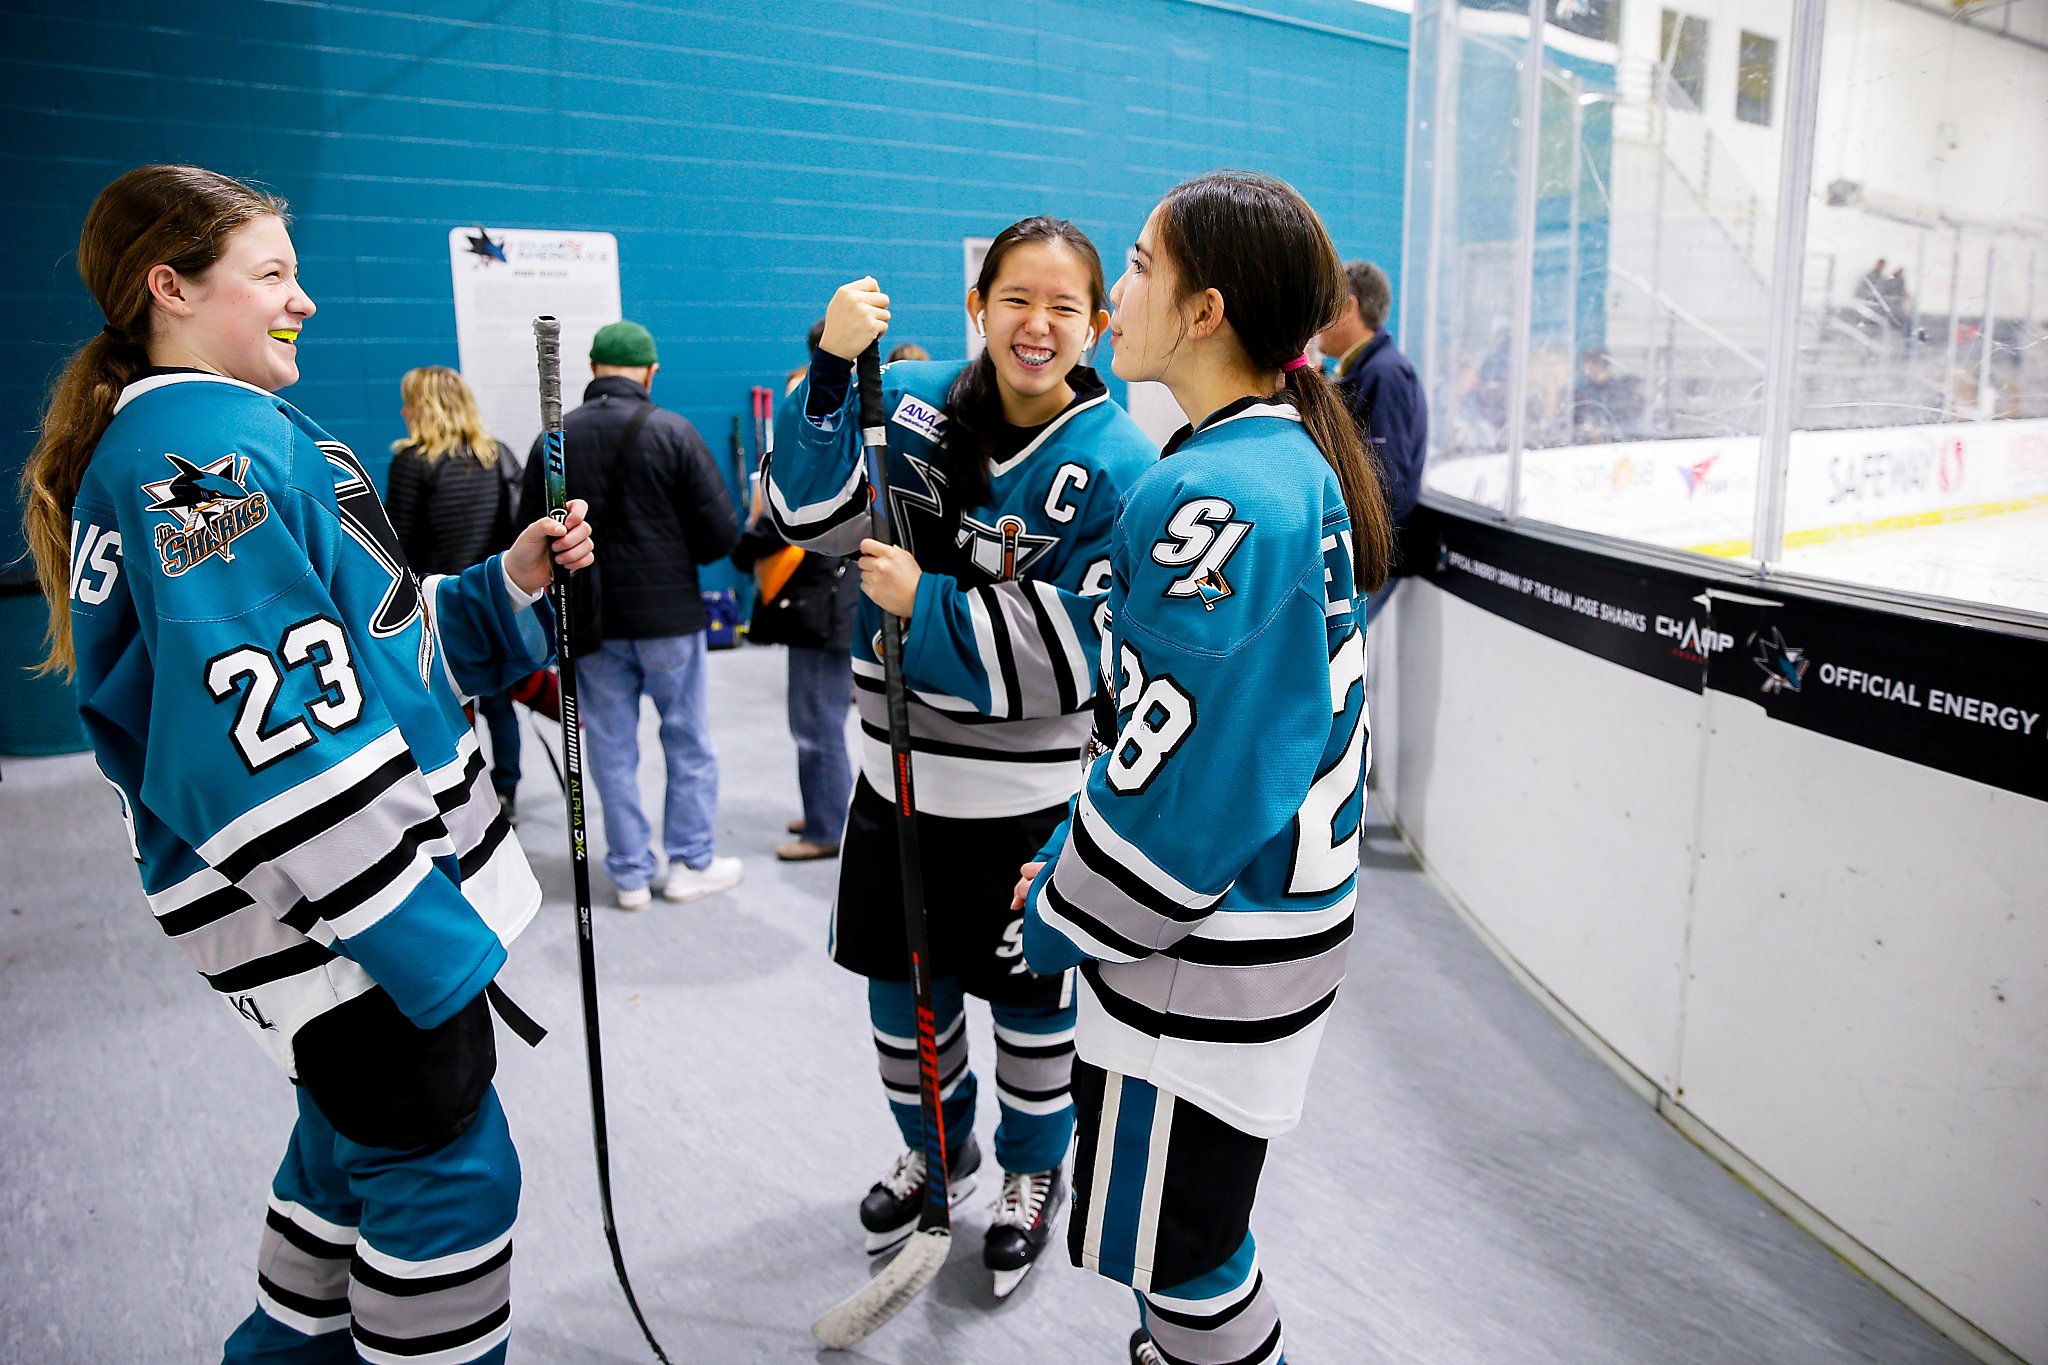 Girls hockey is booming in Bay Area and 